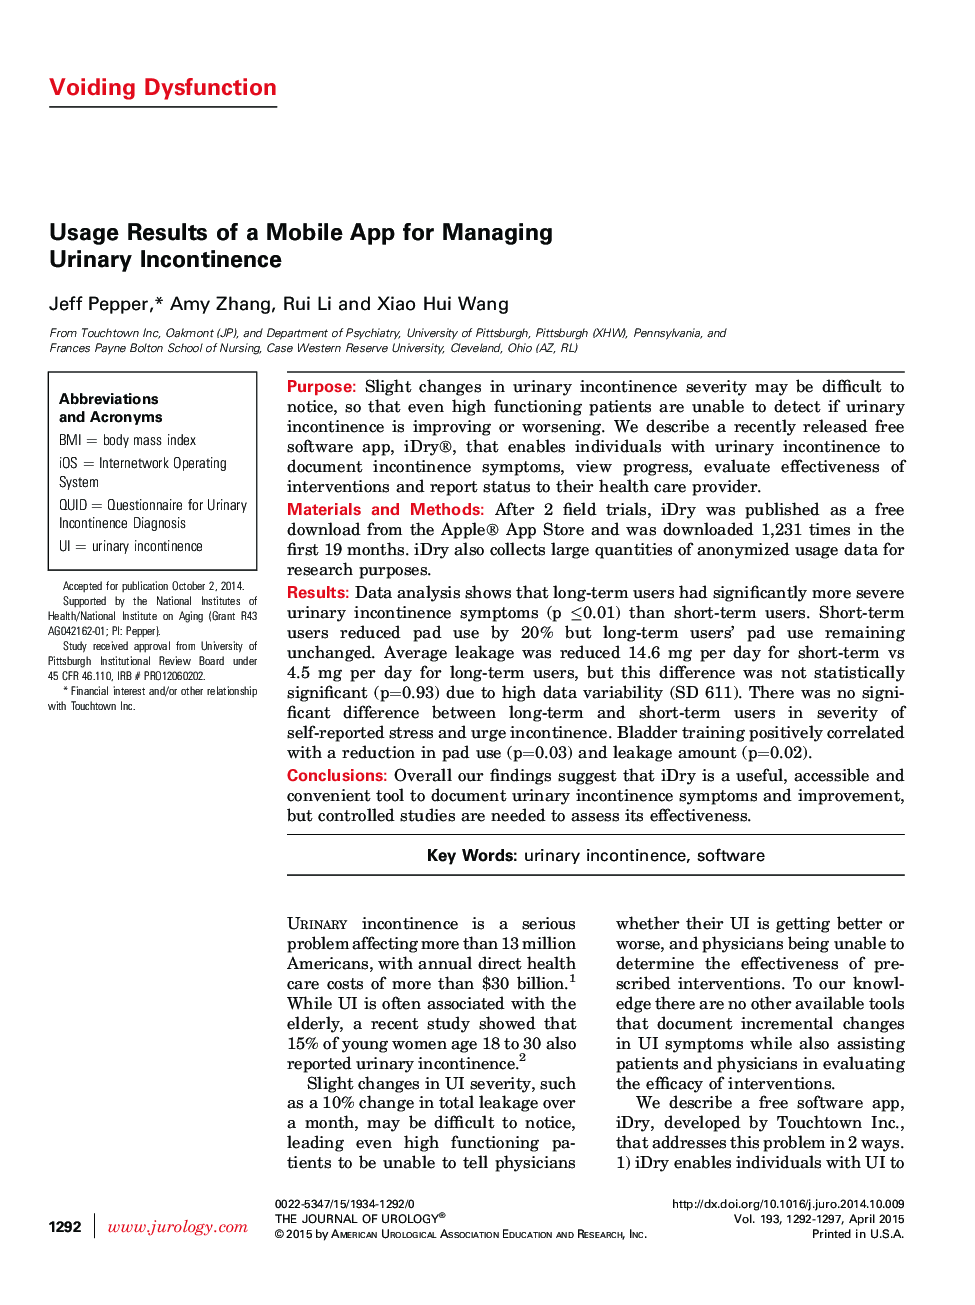 Usage Results of a Mobile App for Managing Urinary Incontinence 